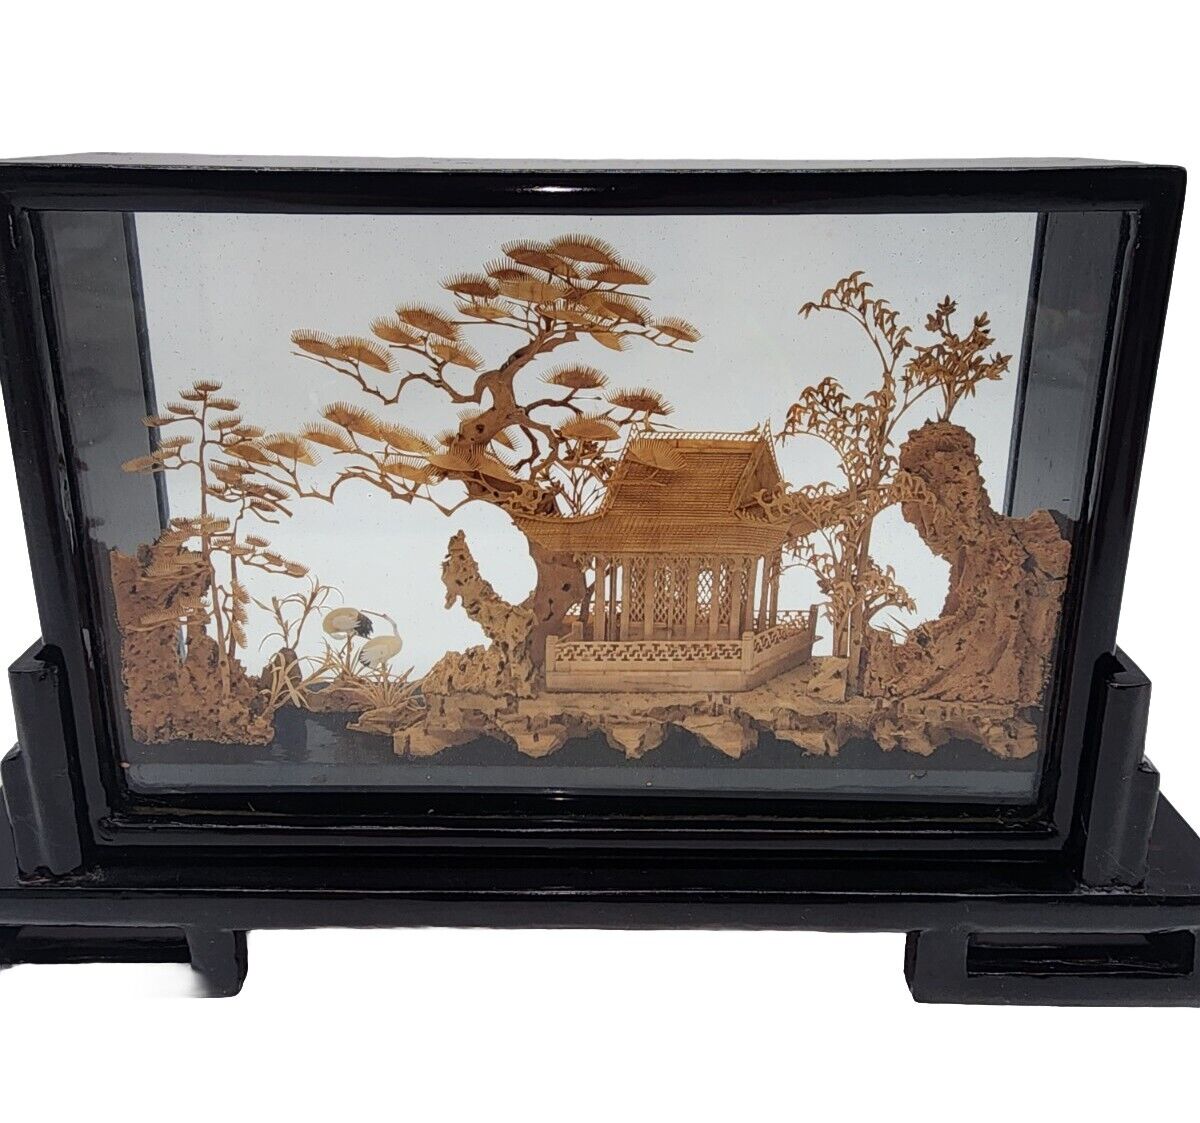 Vtg Chinese Cork Carving 3D Diorama Black Lacquer Wood Frame Encased In Glass